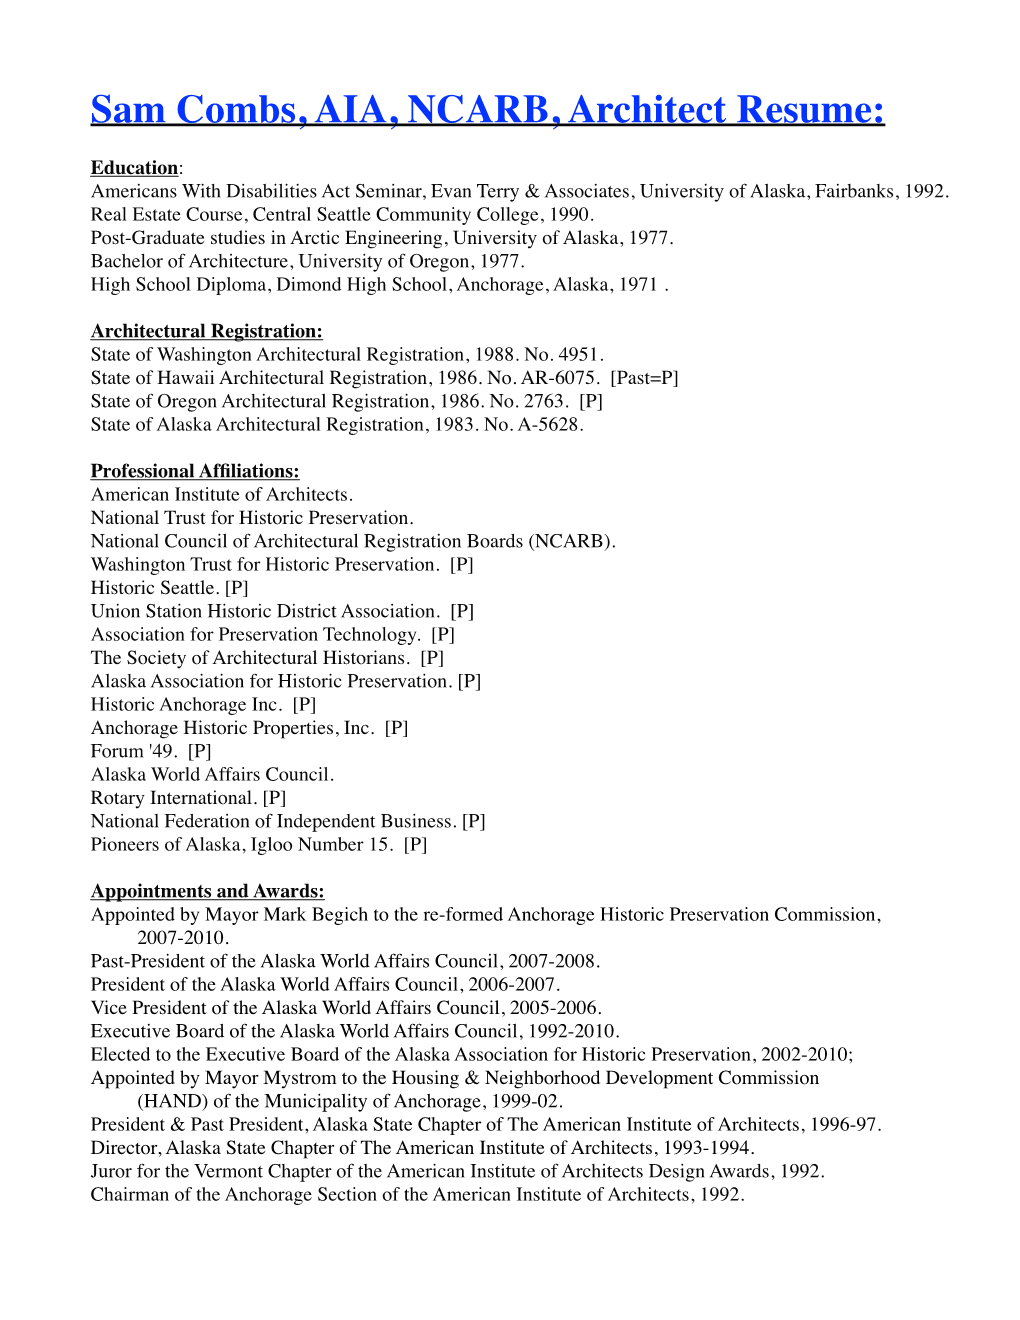 Sam's Resume-11-27-16.Pages